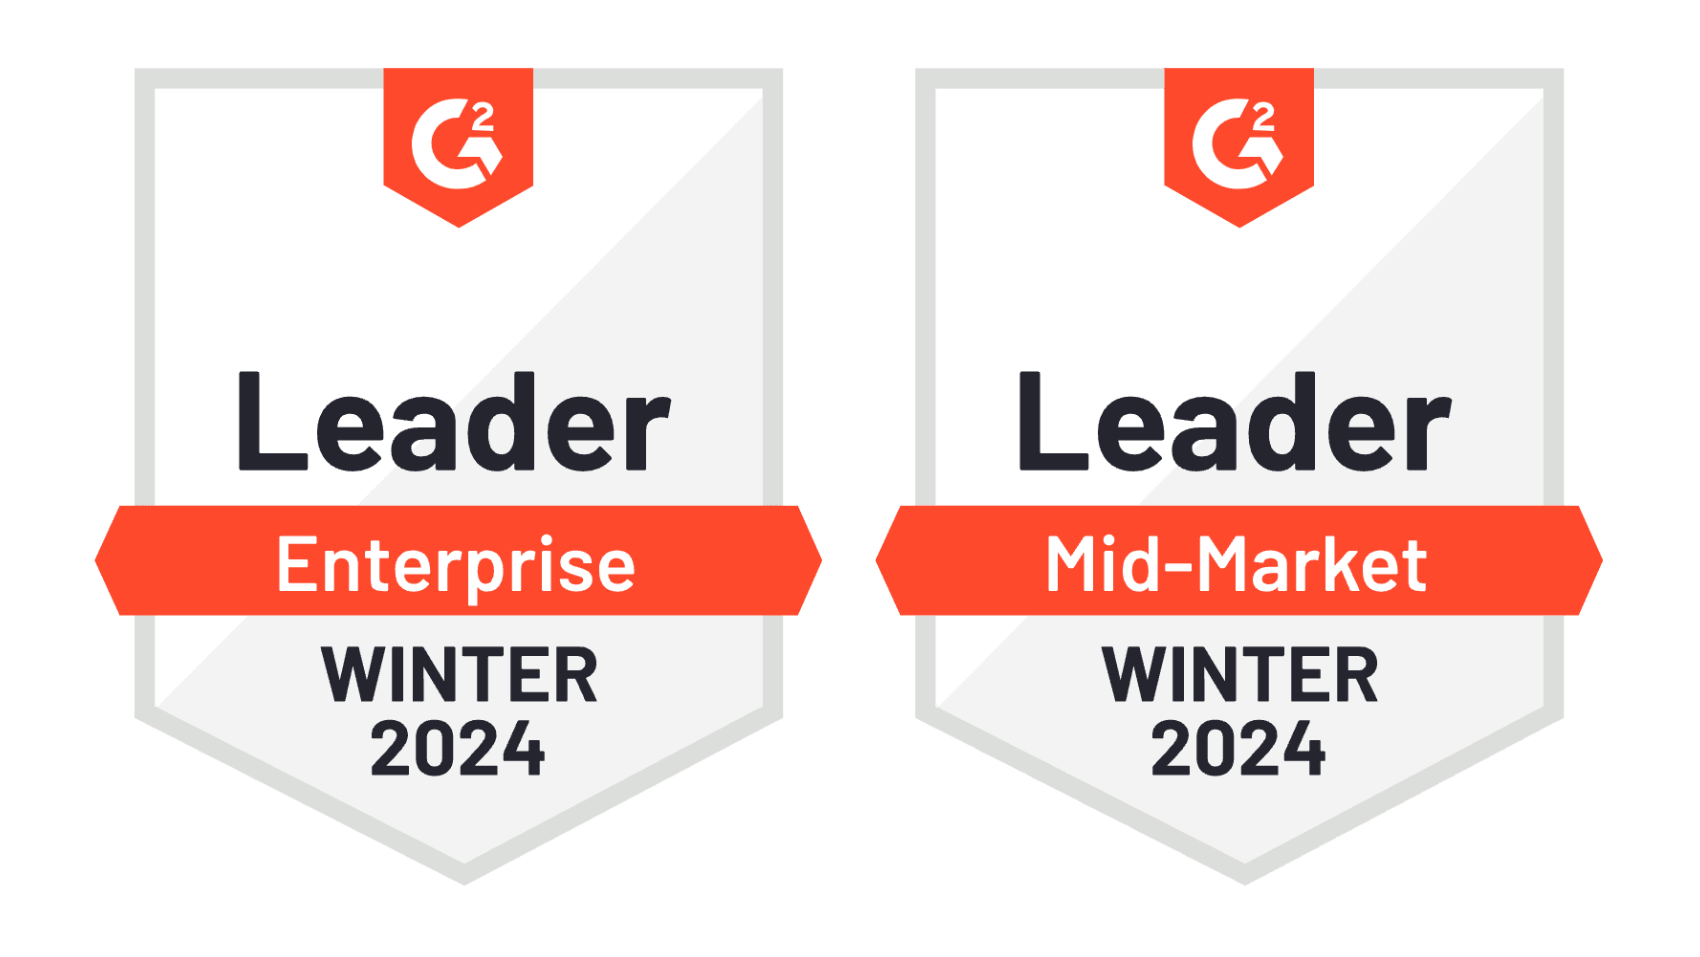 Certinia PS Cloud
has been named the
leader by G2 for Winter 2024